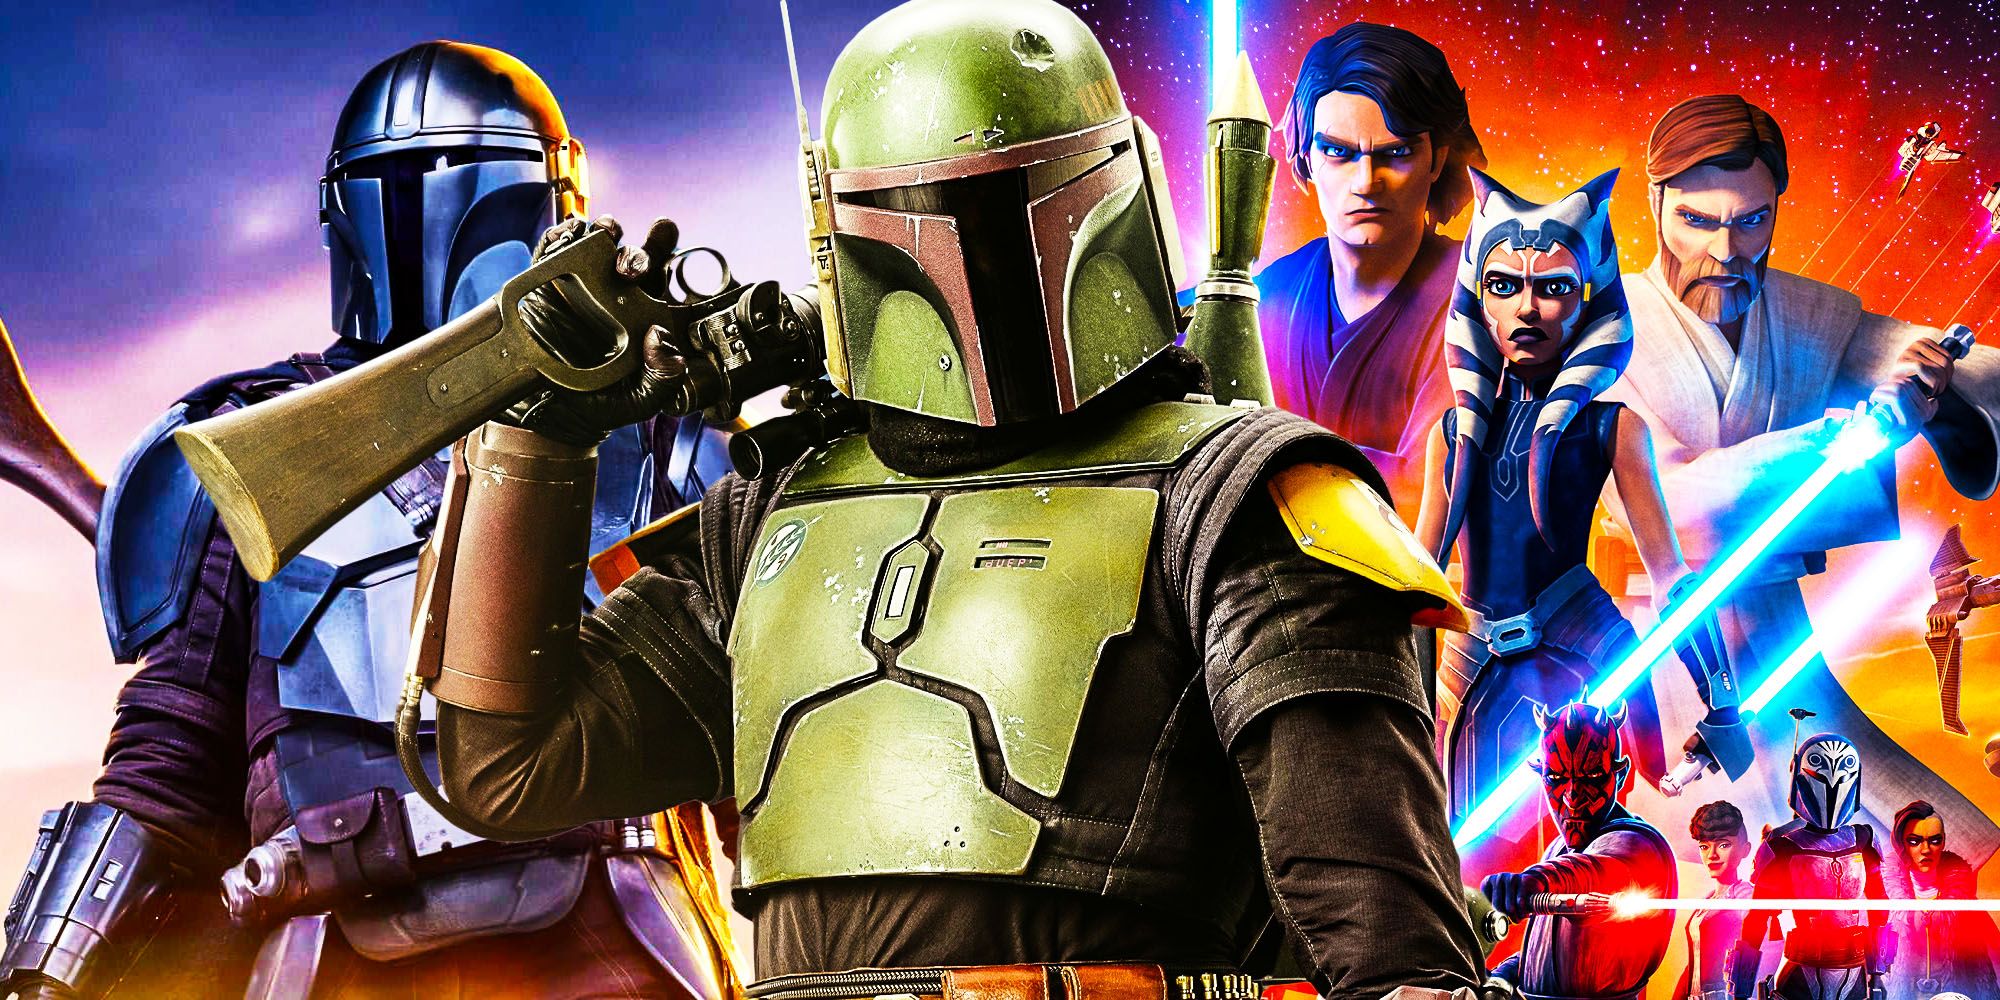 Book of boba fett rotten tomatoes score compared to other star wars tv shows the mandalorian clone wars